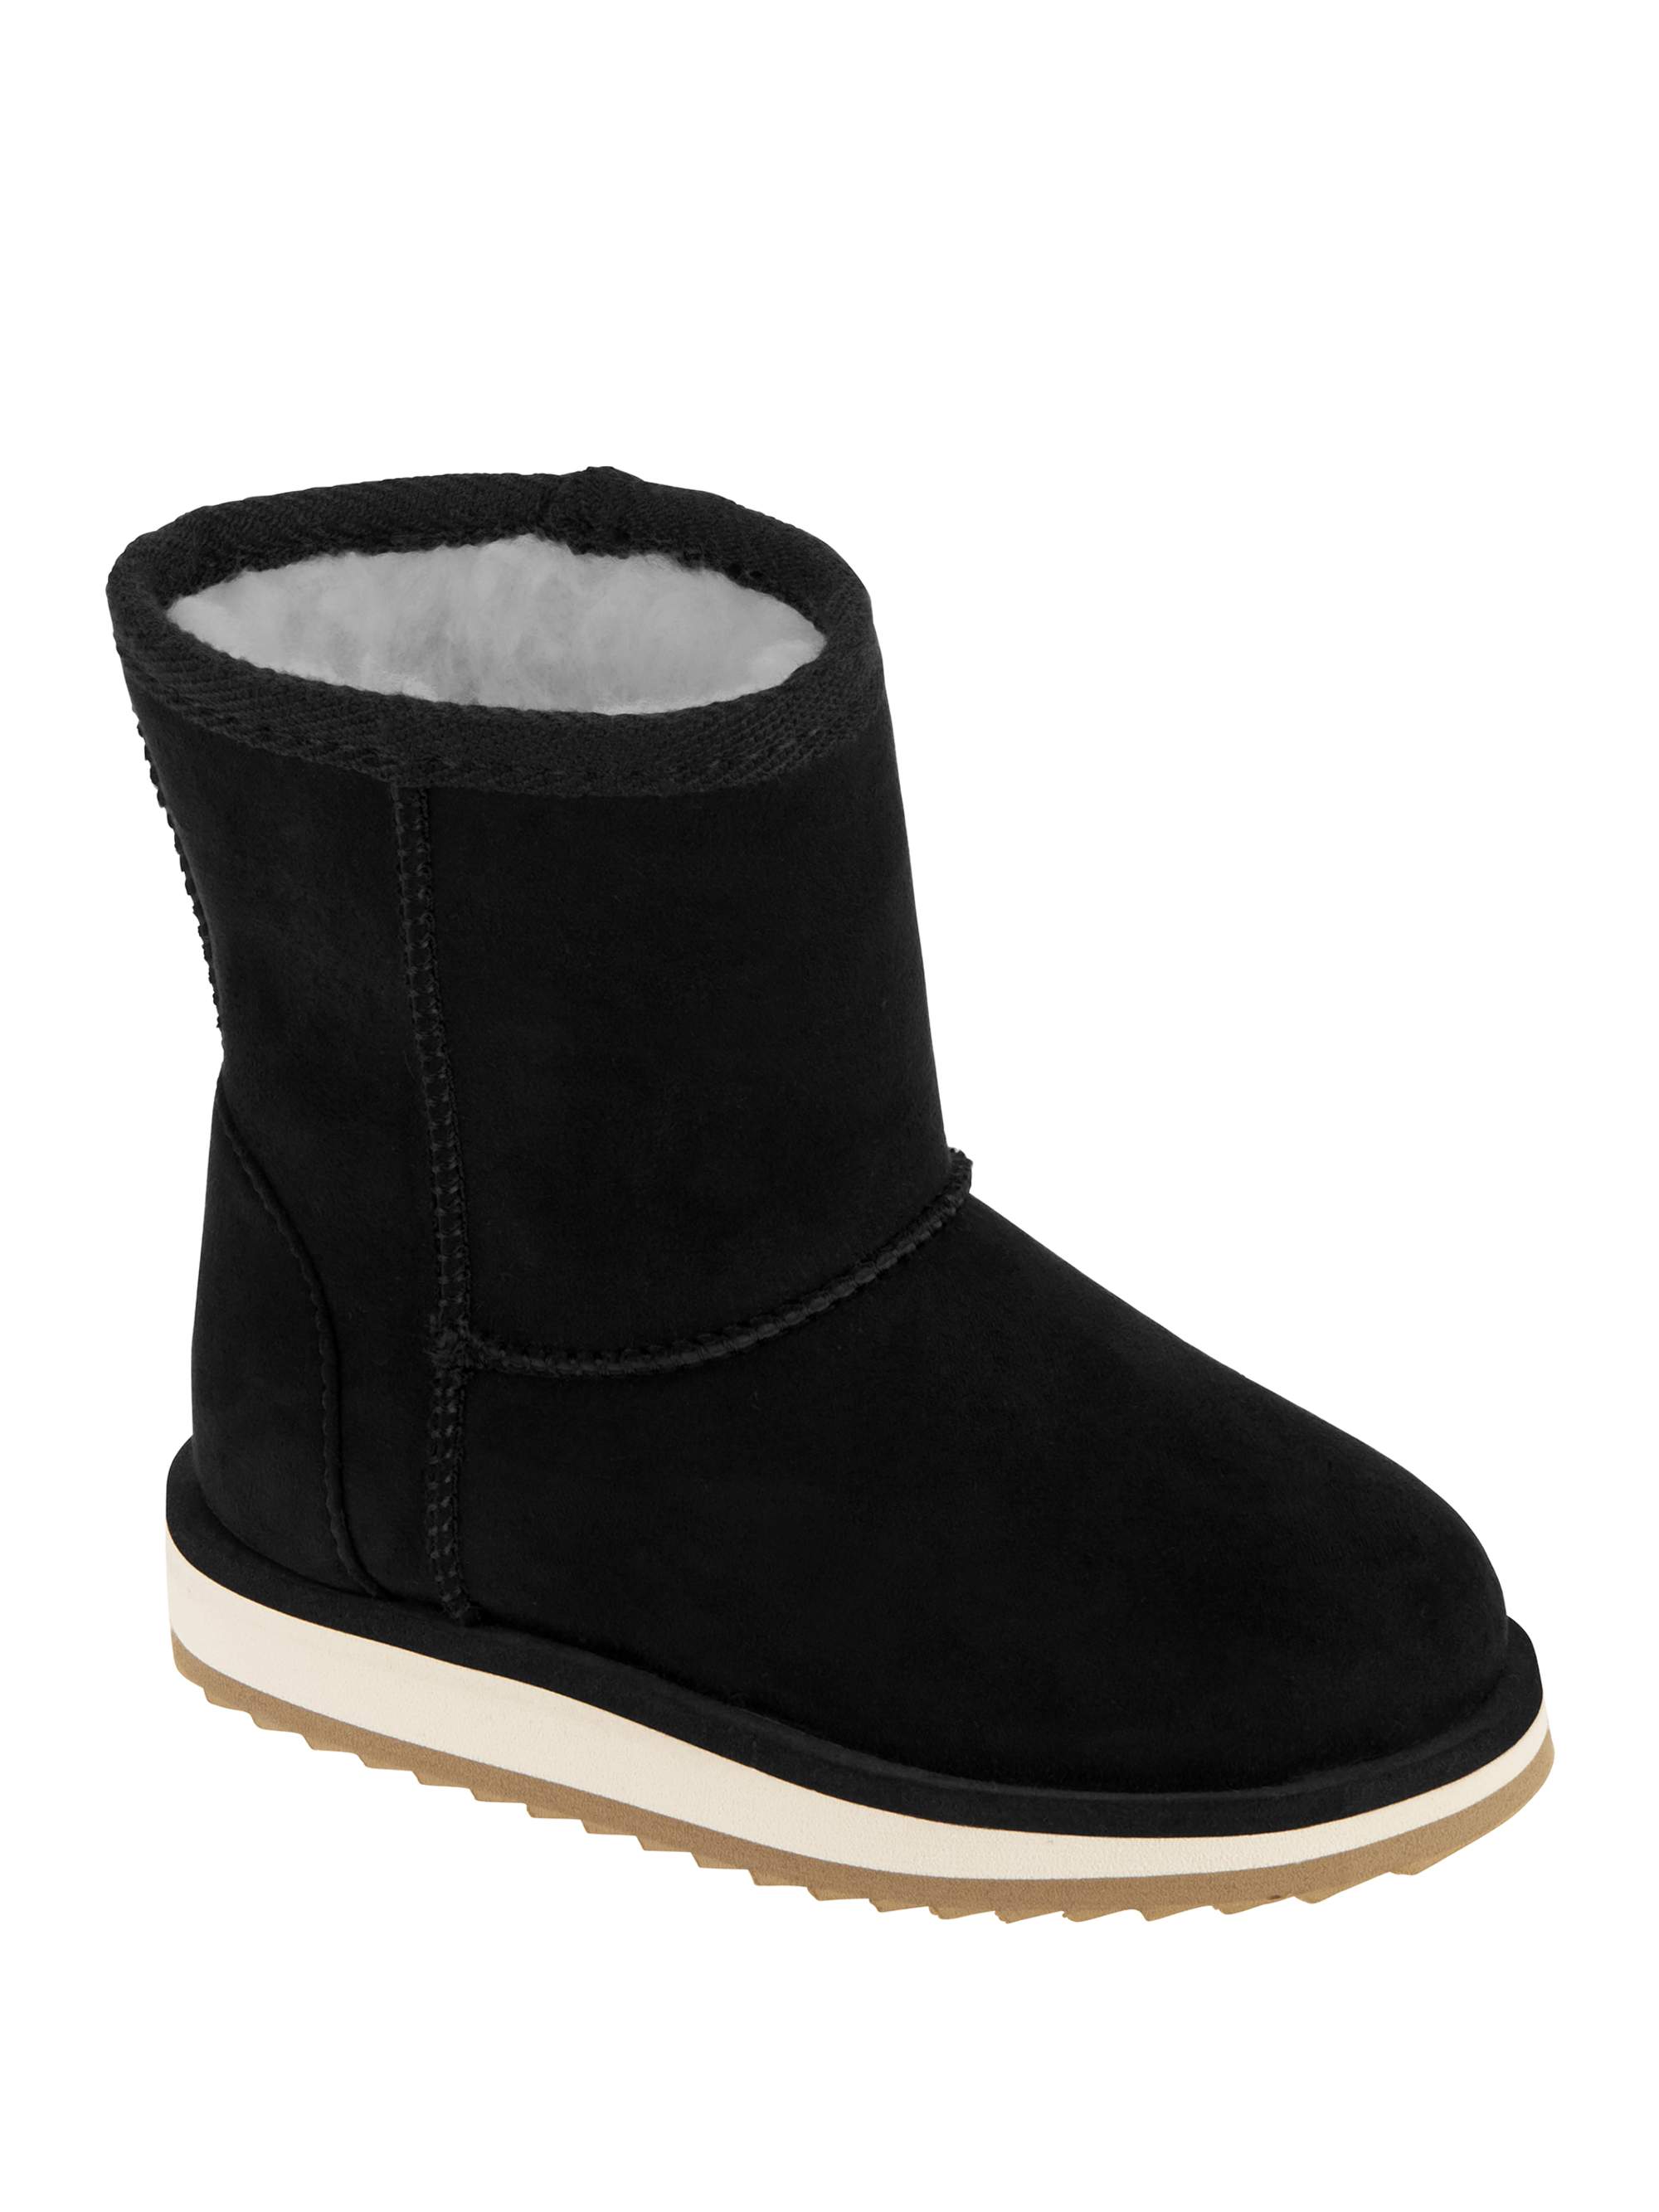 Wonder Nation Faux Shearling Boots (Toddler Girls) - image 1 of 6